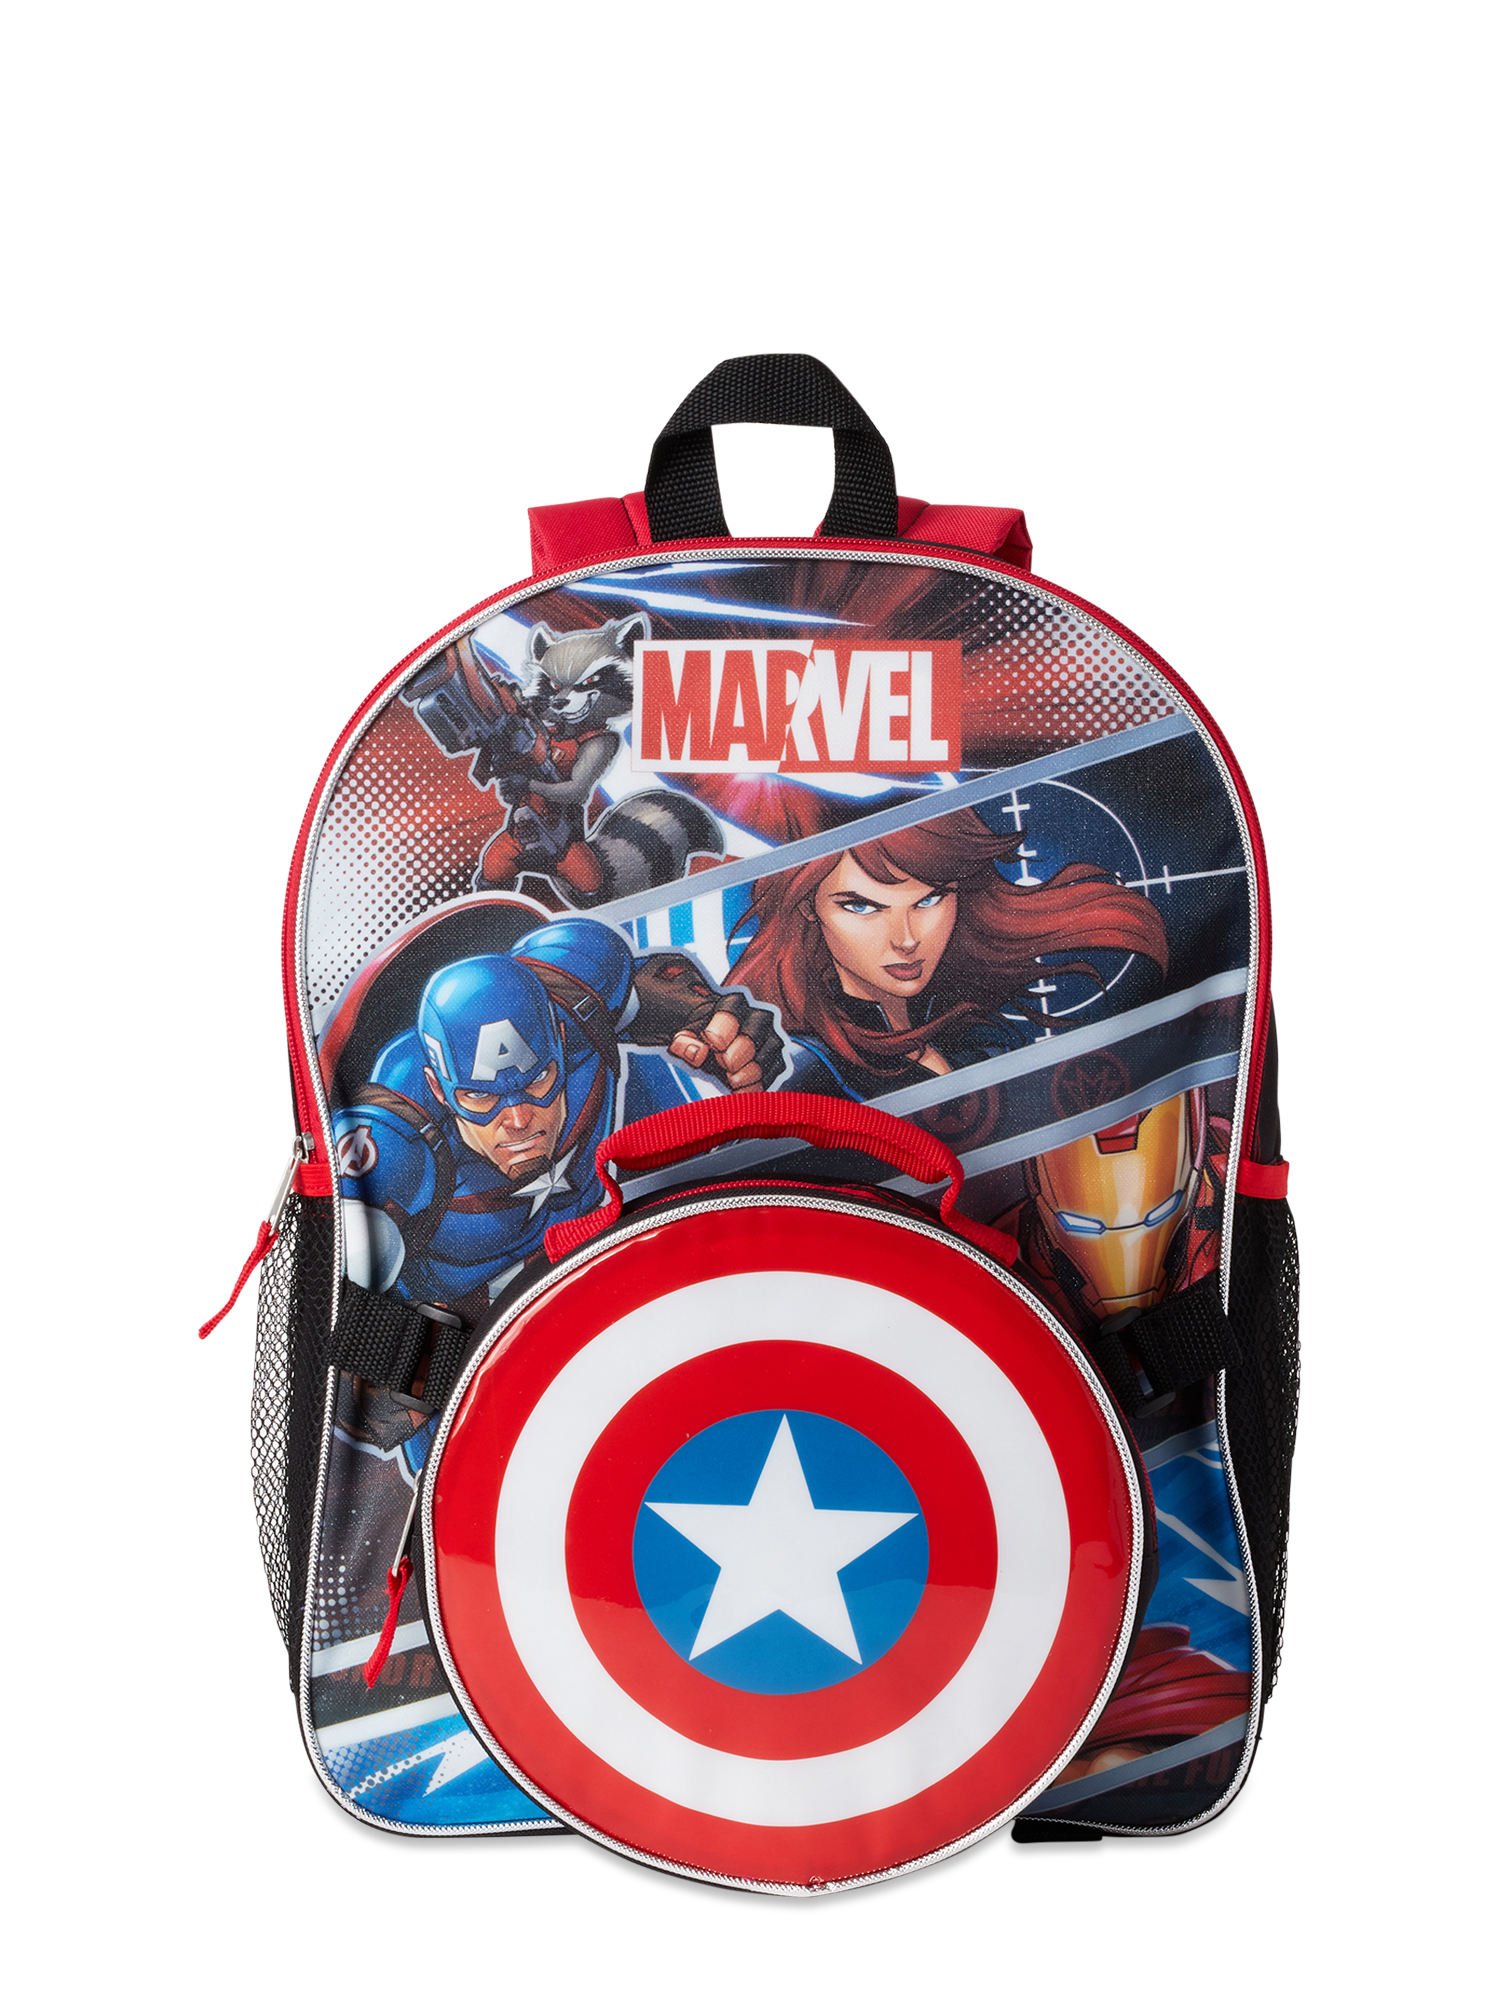 Marvel Captain America Backpack with Lunch - image 4 of 4